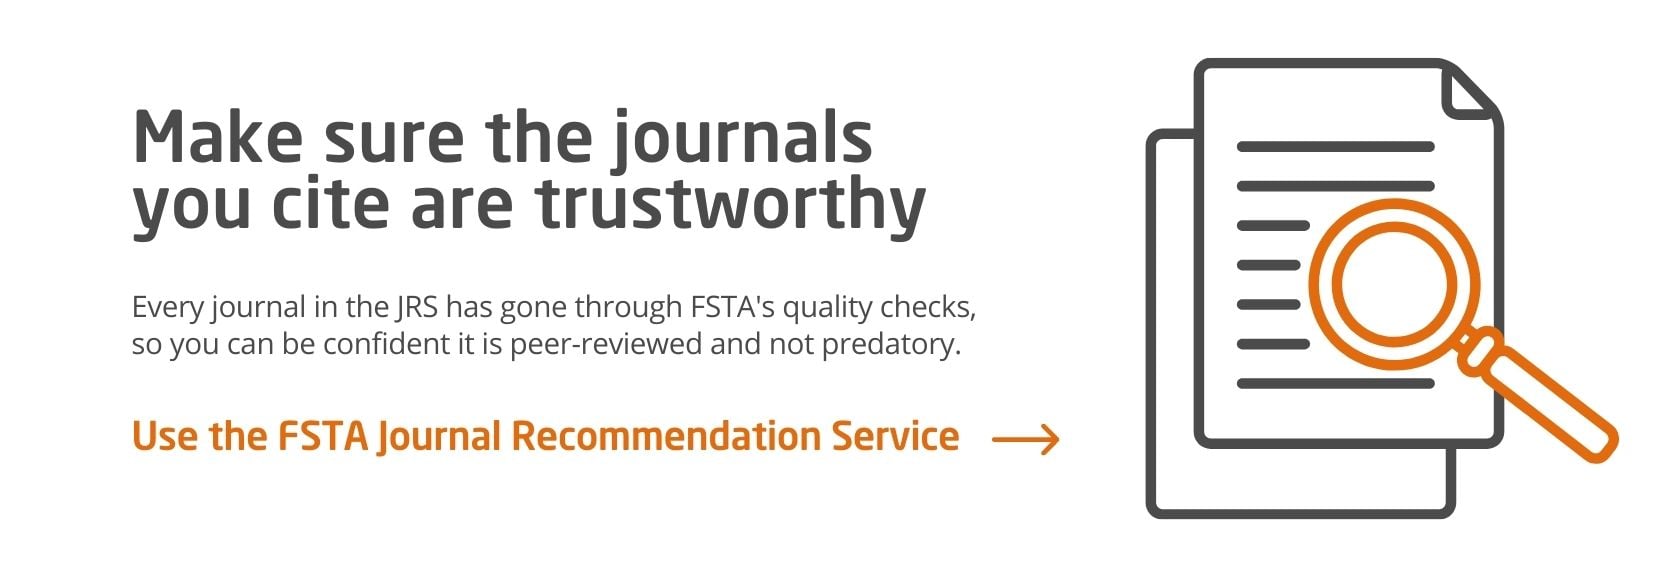 Make-the-journals-you-cite-are-trustworthy-with-the-FSTA-Journal-Recommendation-Service